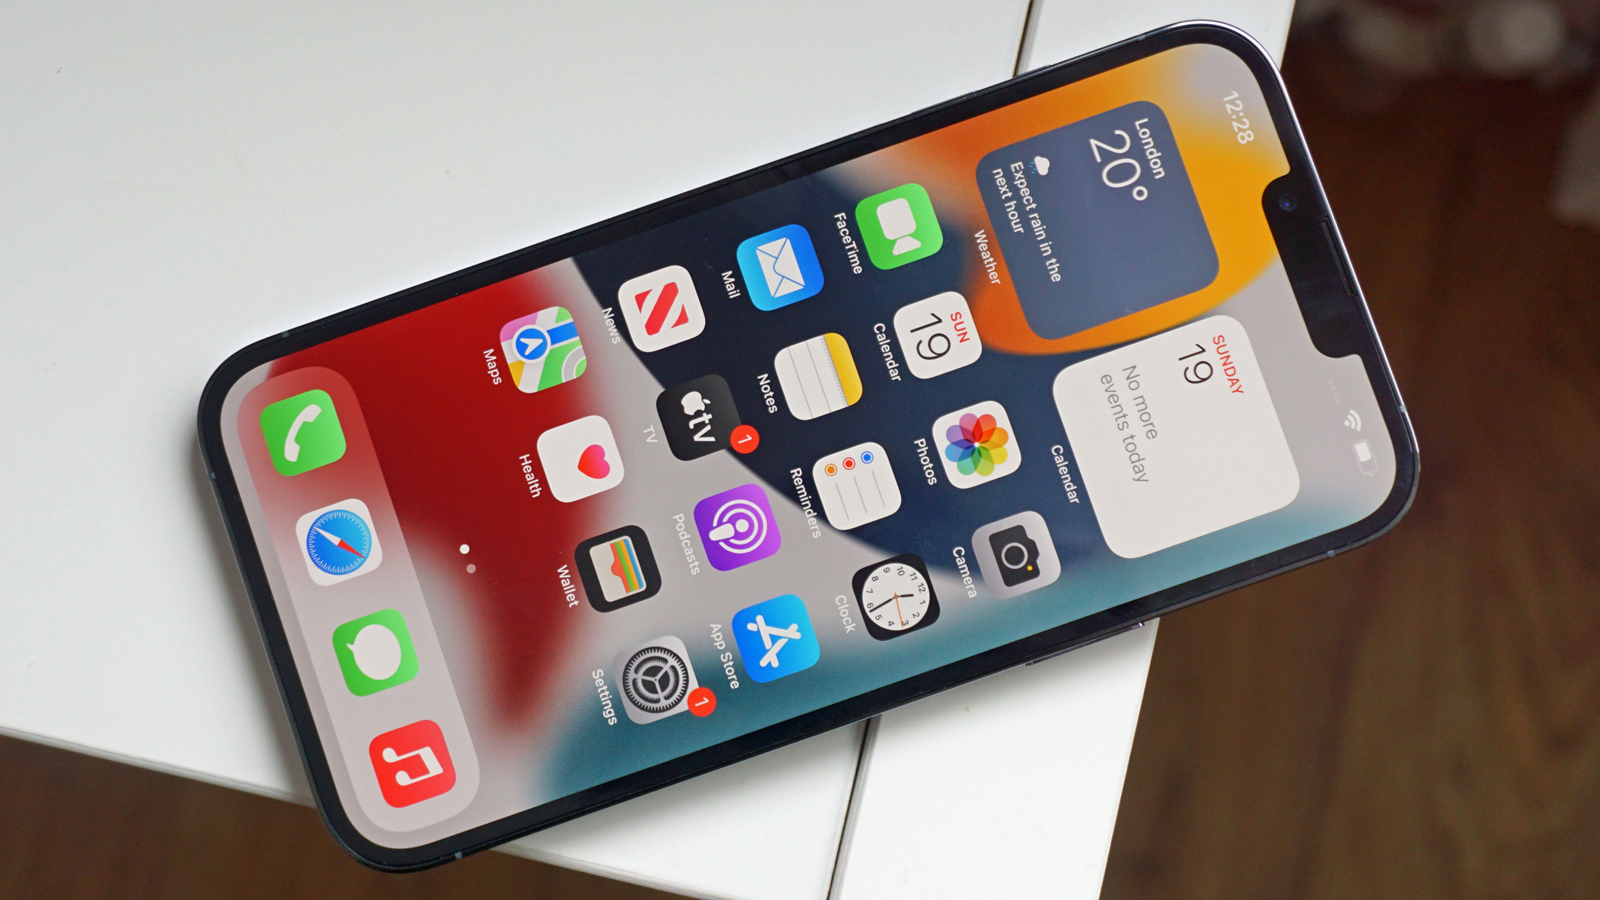 The iPhone 13 Pro Max is lying face up on a table showing the home screen